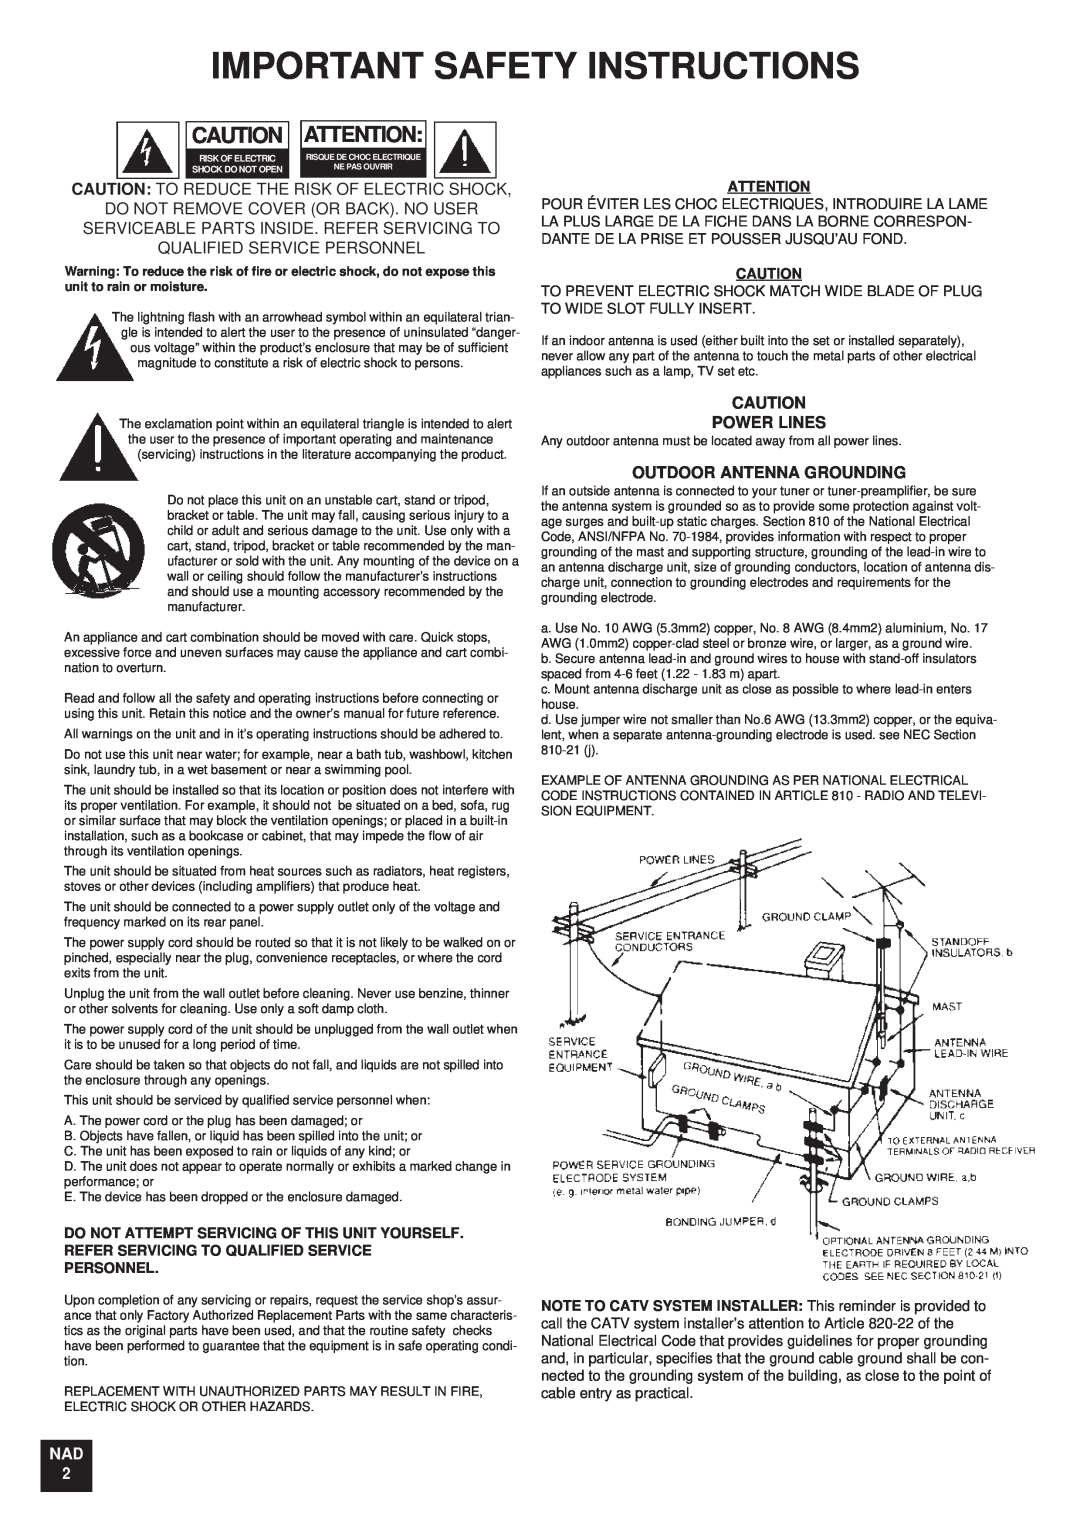 NAD T 751751 owner manual Important Safety Instructions, Power Lines, Outdoor Antenna Grounding, Nad 